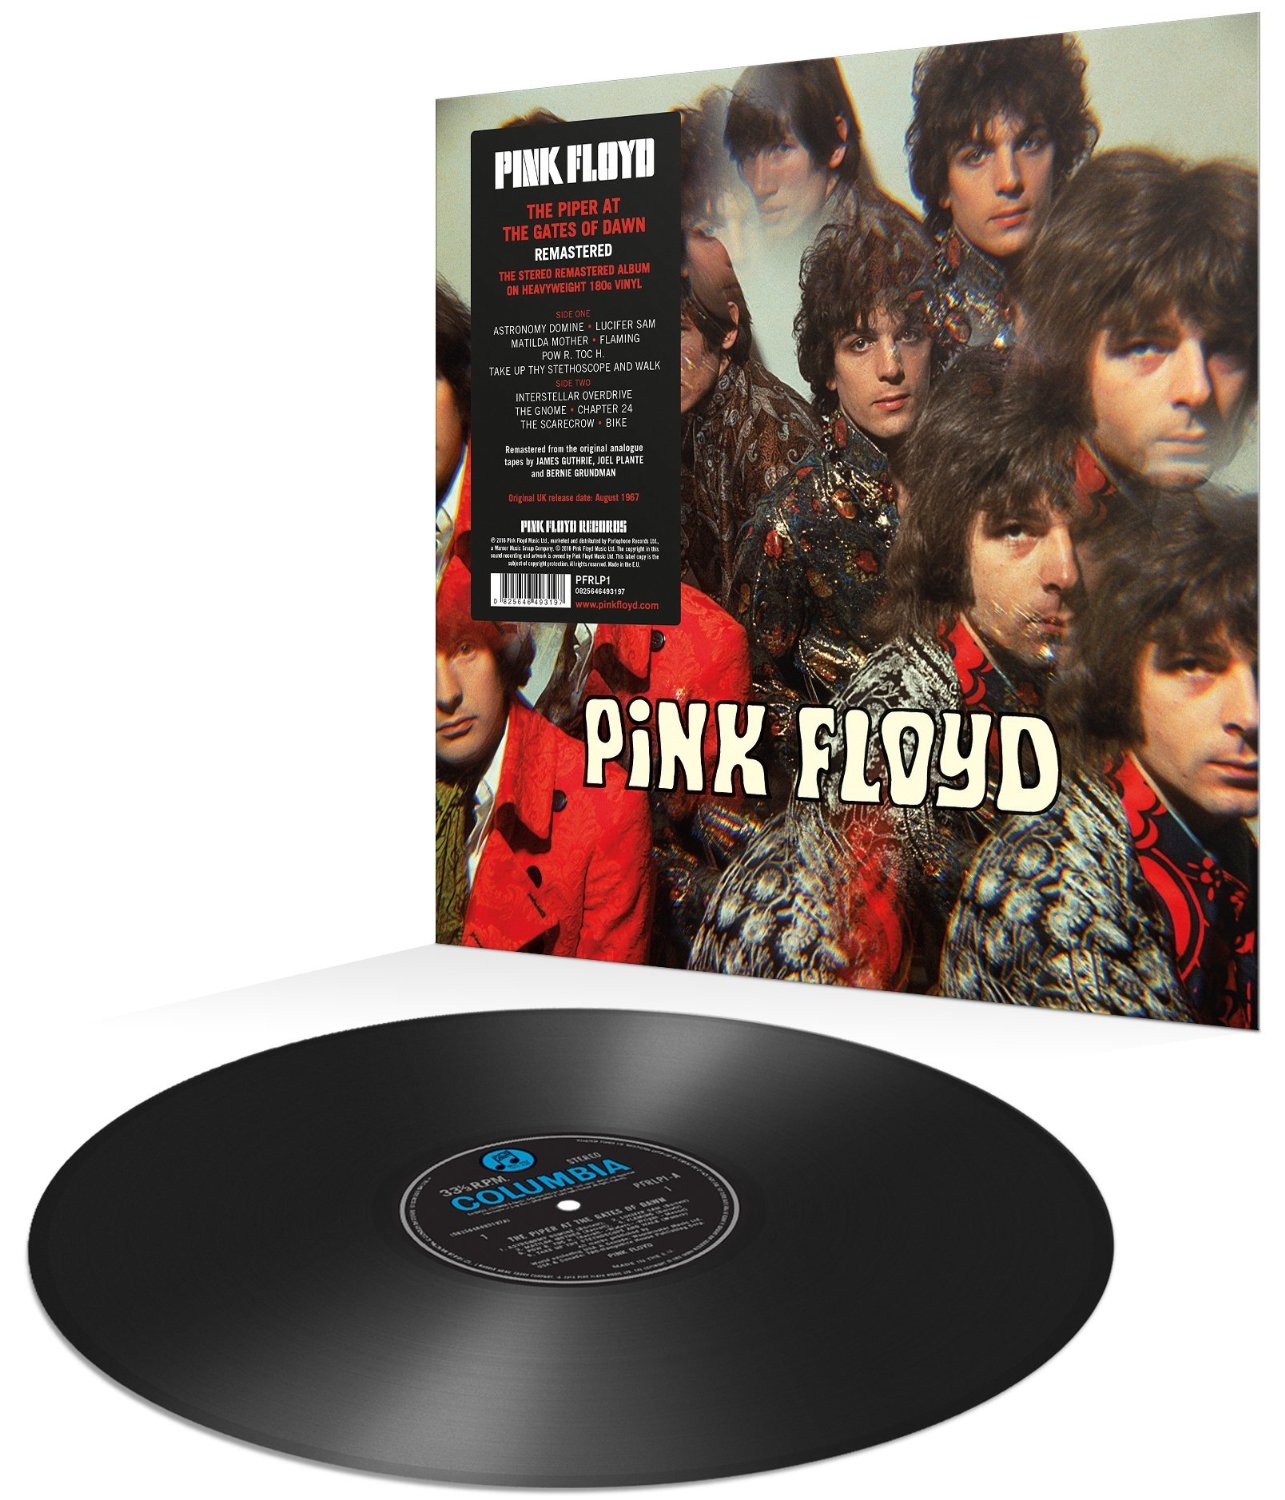 Pink Floyd "The Piper At The Gates Of Dawn" Vinyl